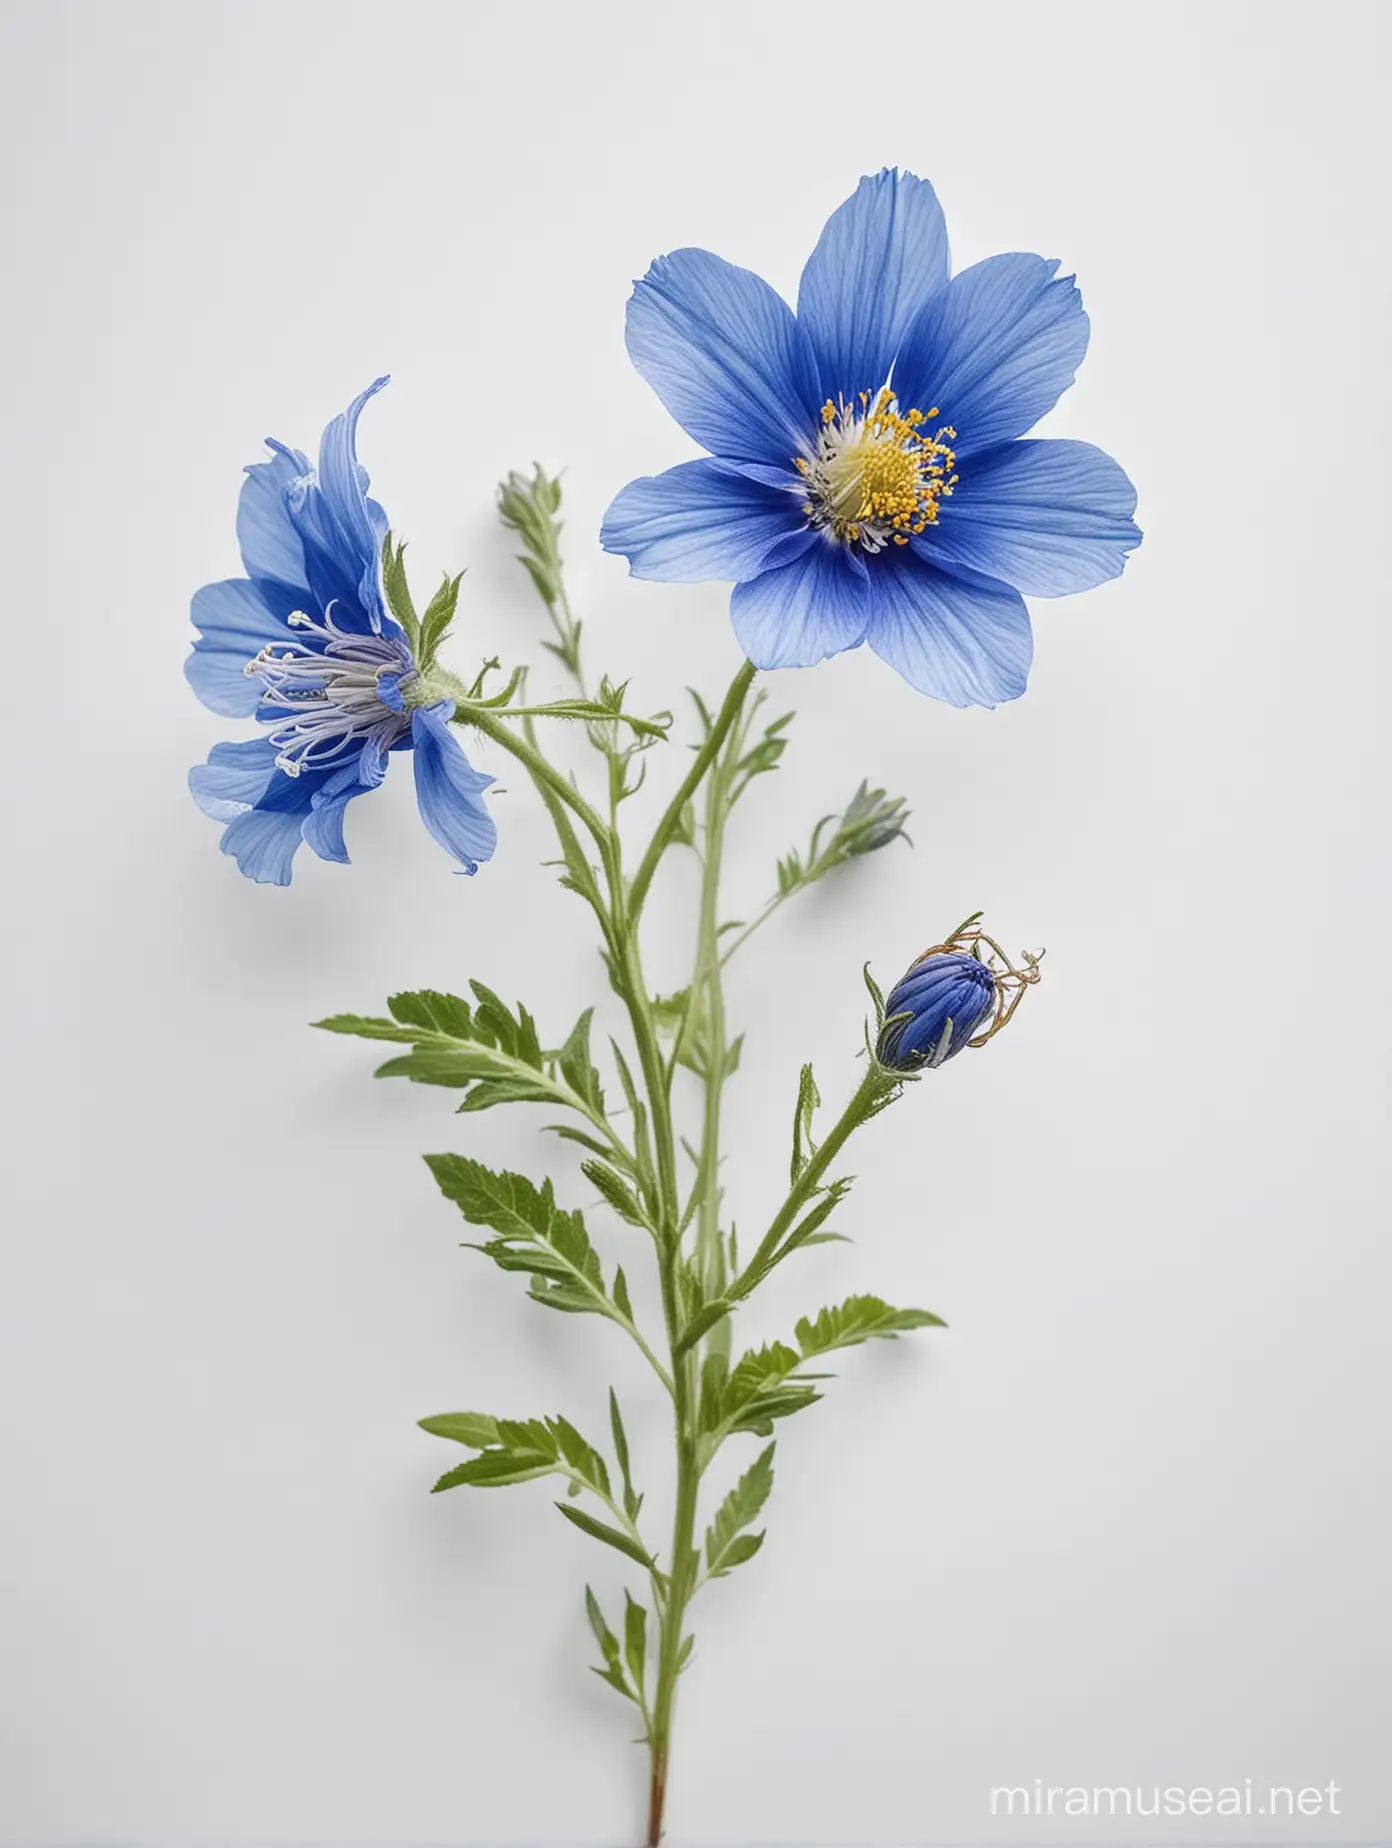 Wild Blue and White Flowers on Natural Background